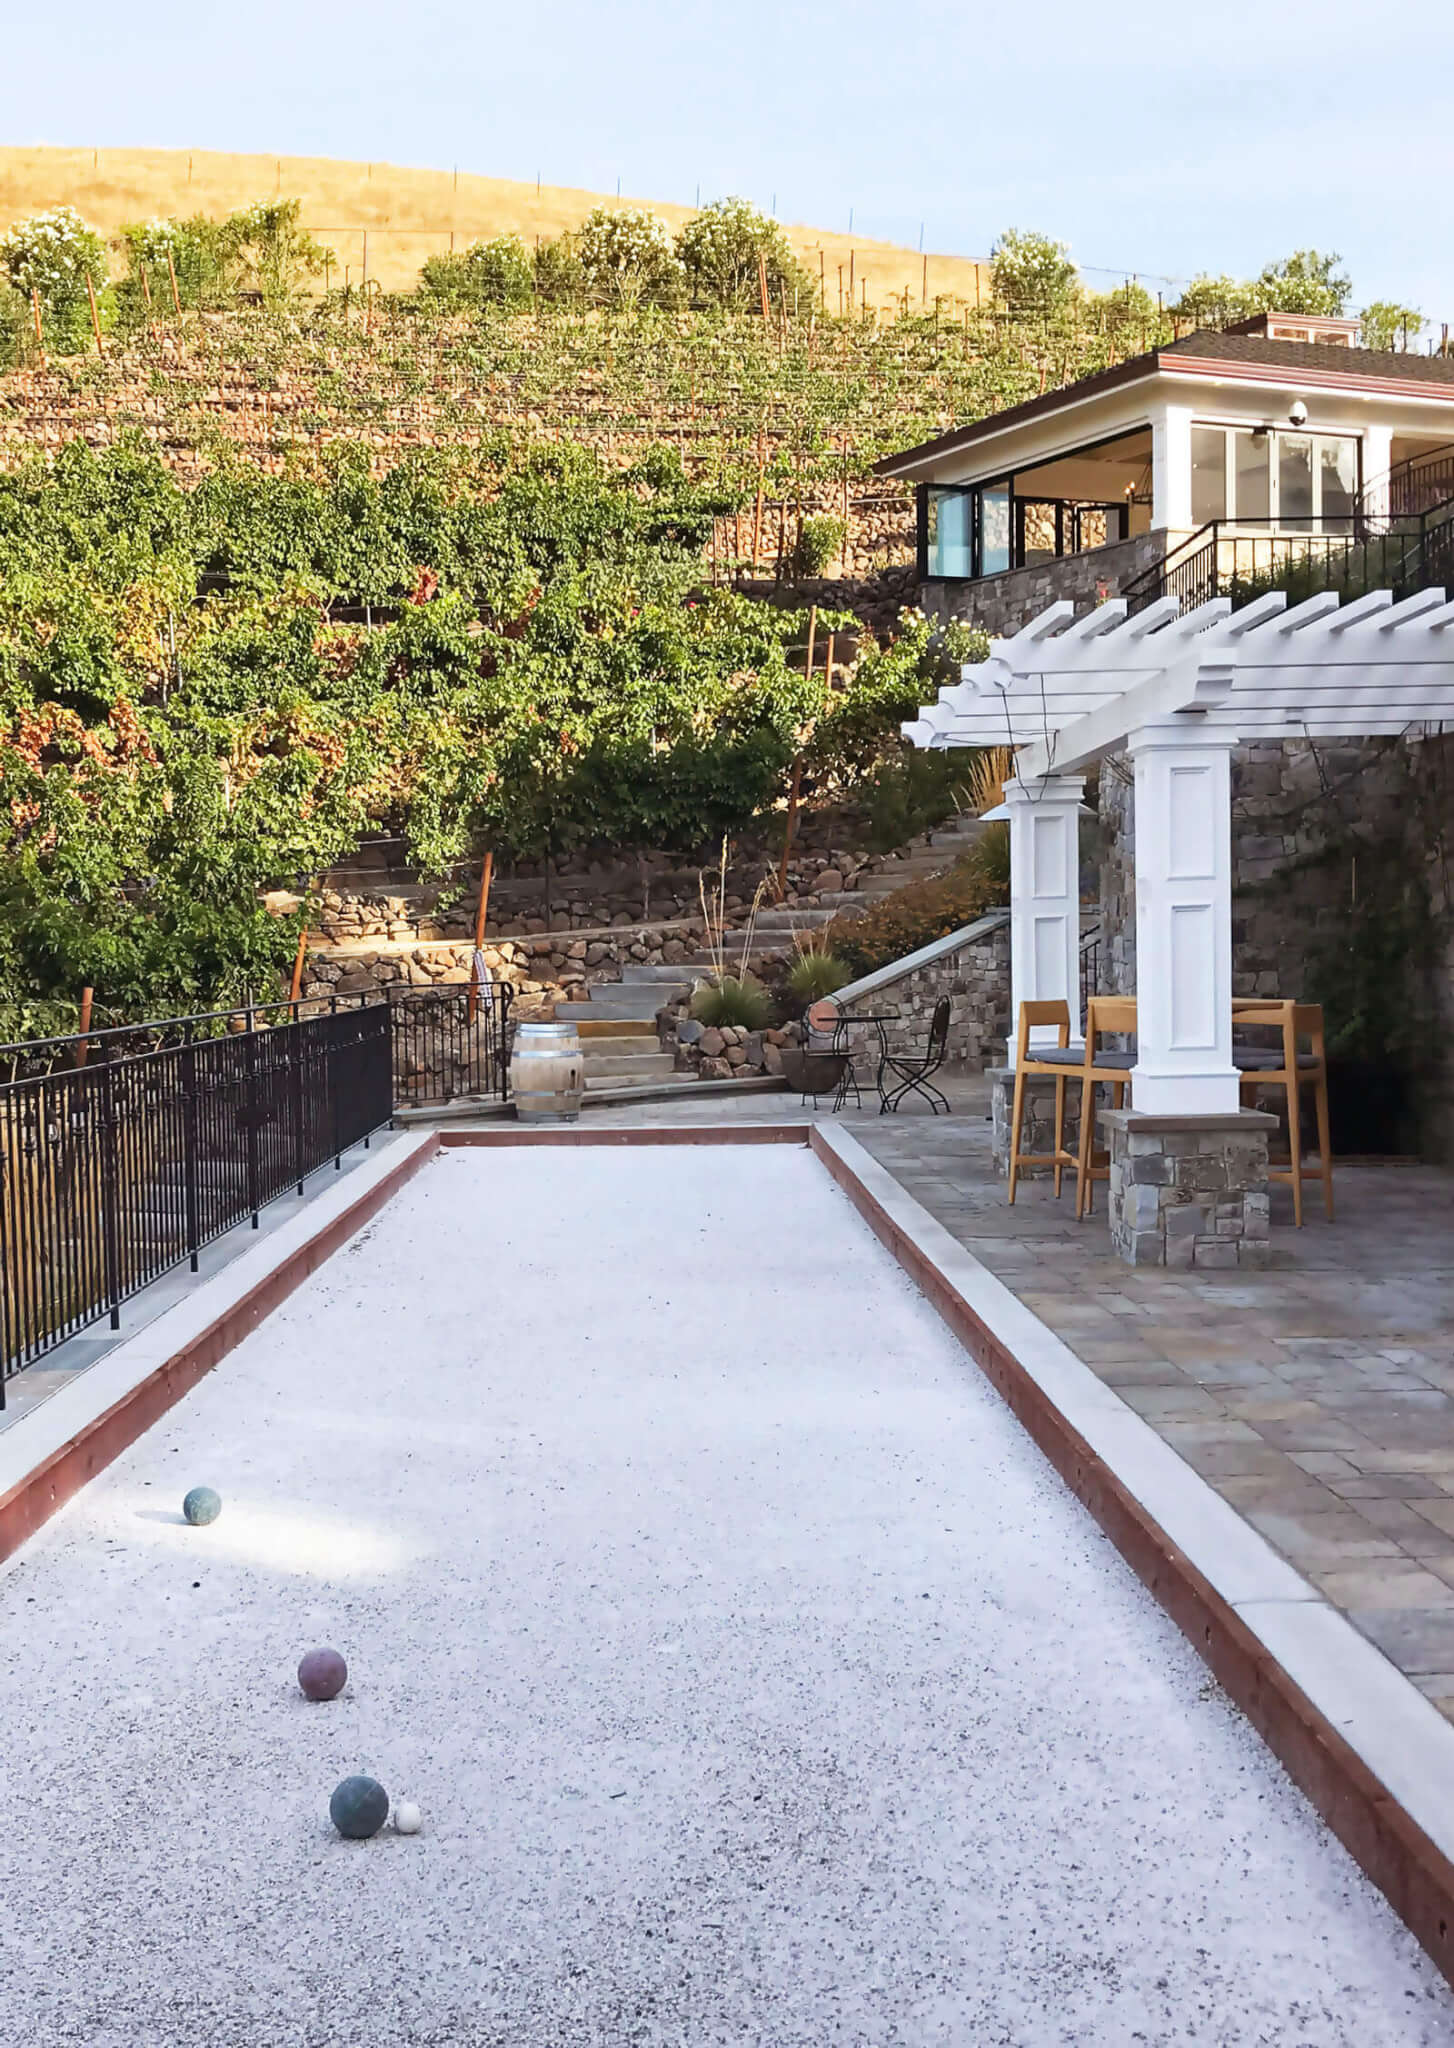 White tile-lined bocce-ball court, next to white pergola, looking up to vineyard on the hill